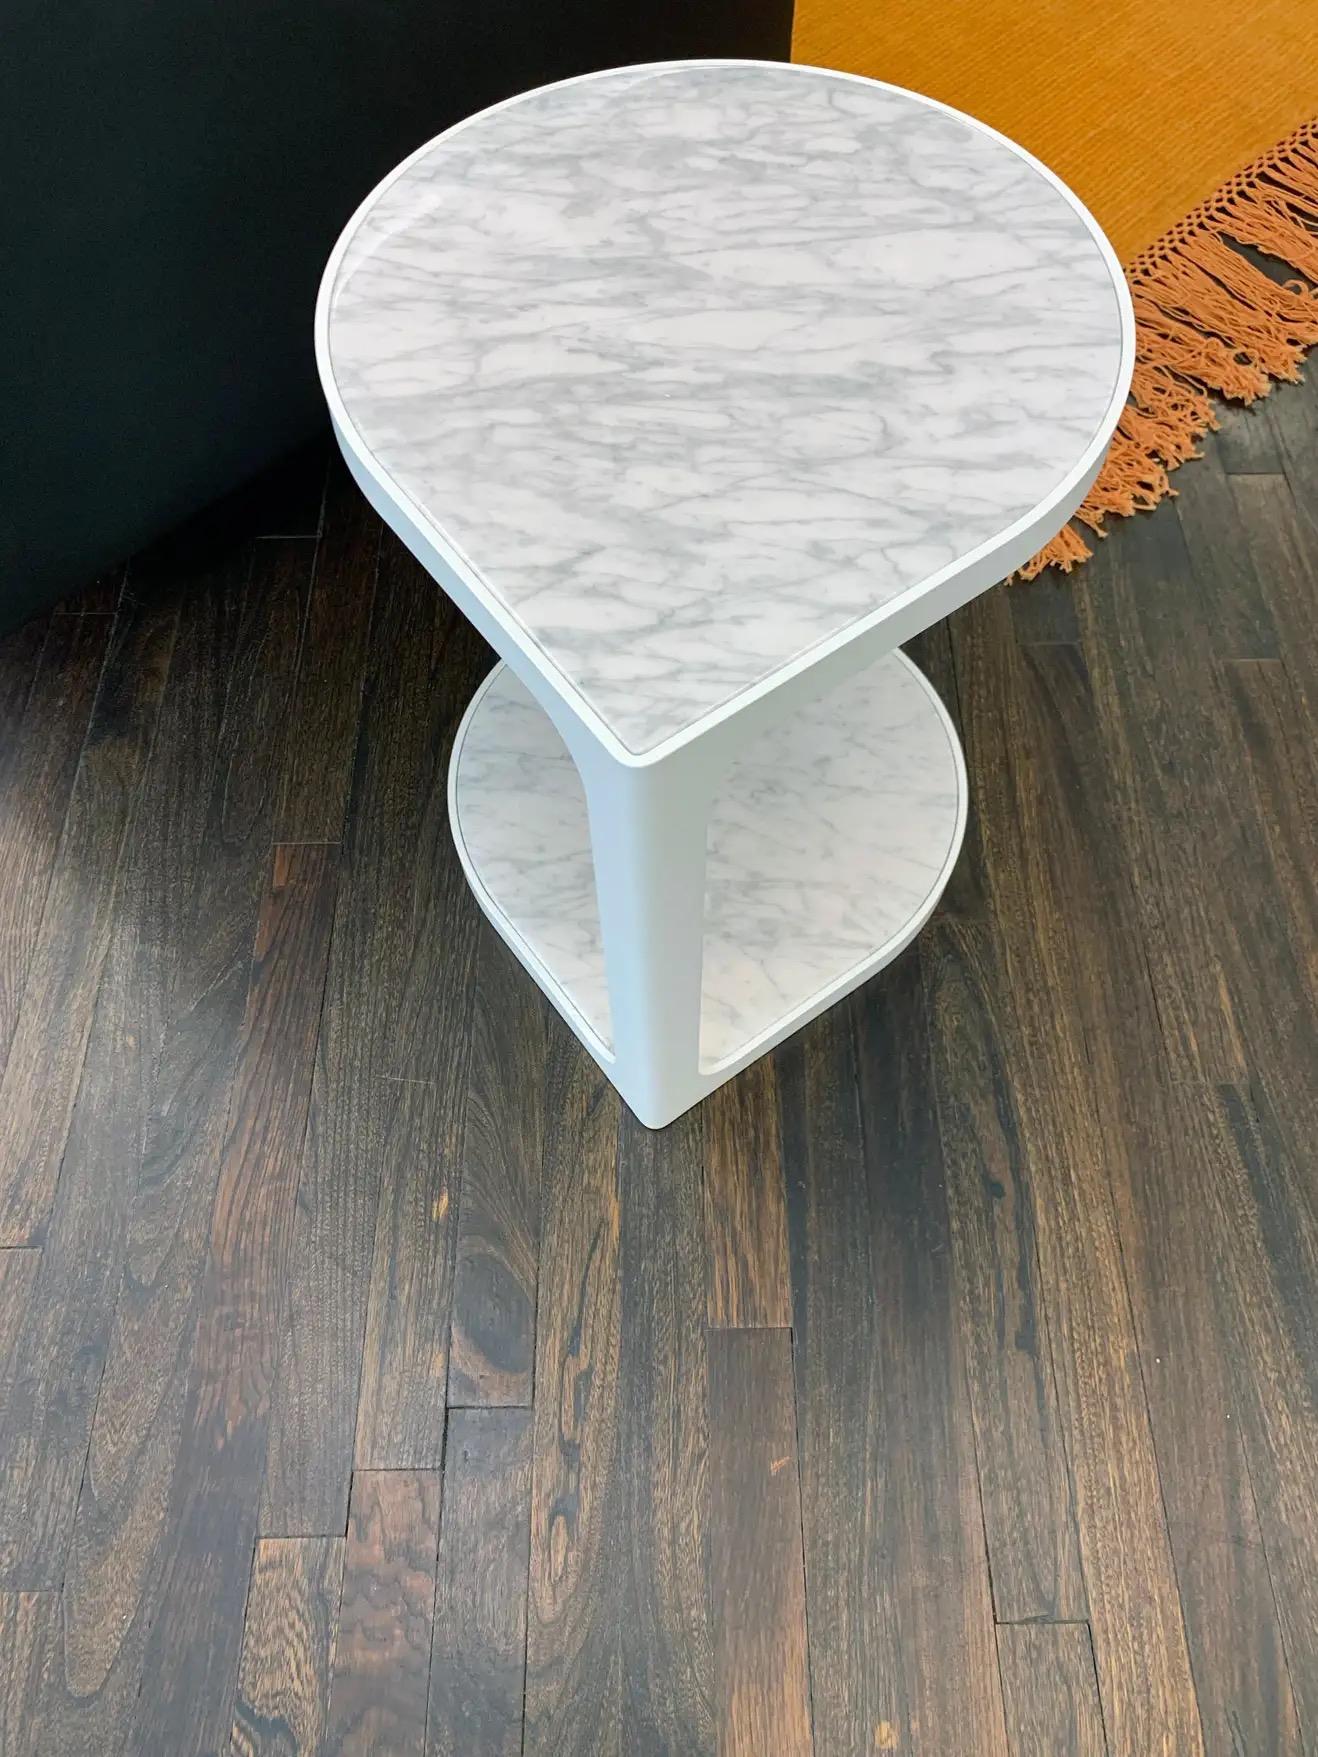 Nature’s shapes represent a major source of inspiration for designer Gordon Guillaumier. The top of the Coot table was inspired by the simple geometry of a petal; it is a perfect motif for generating a variety of different models from one single